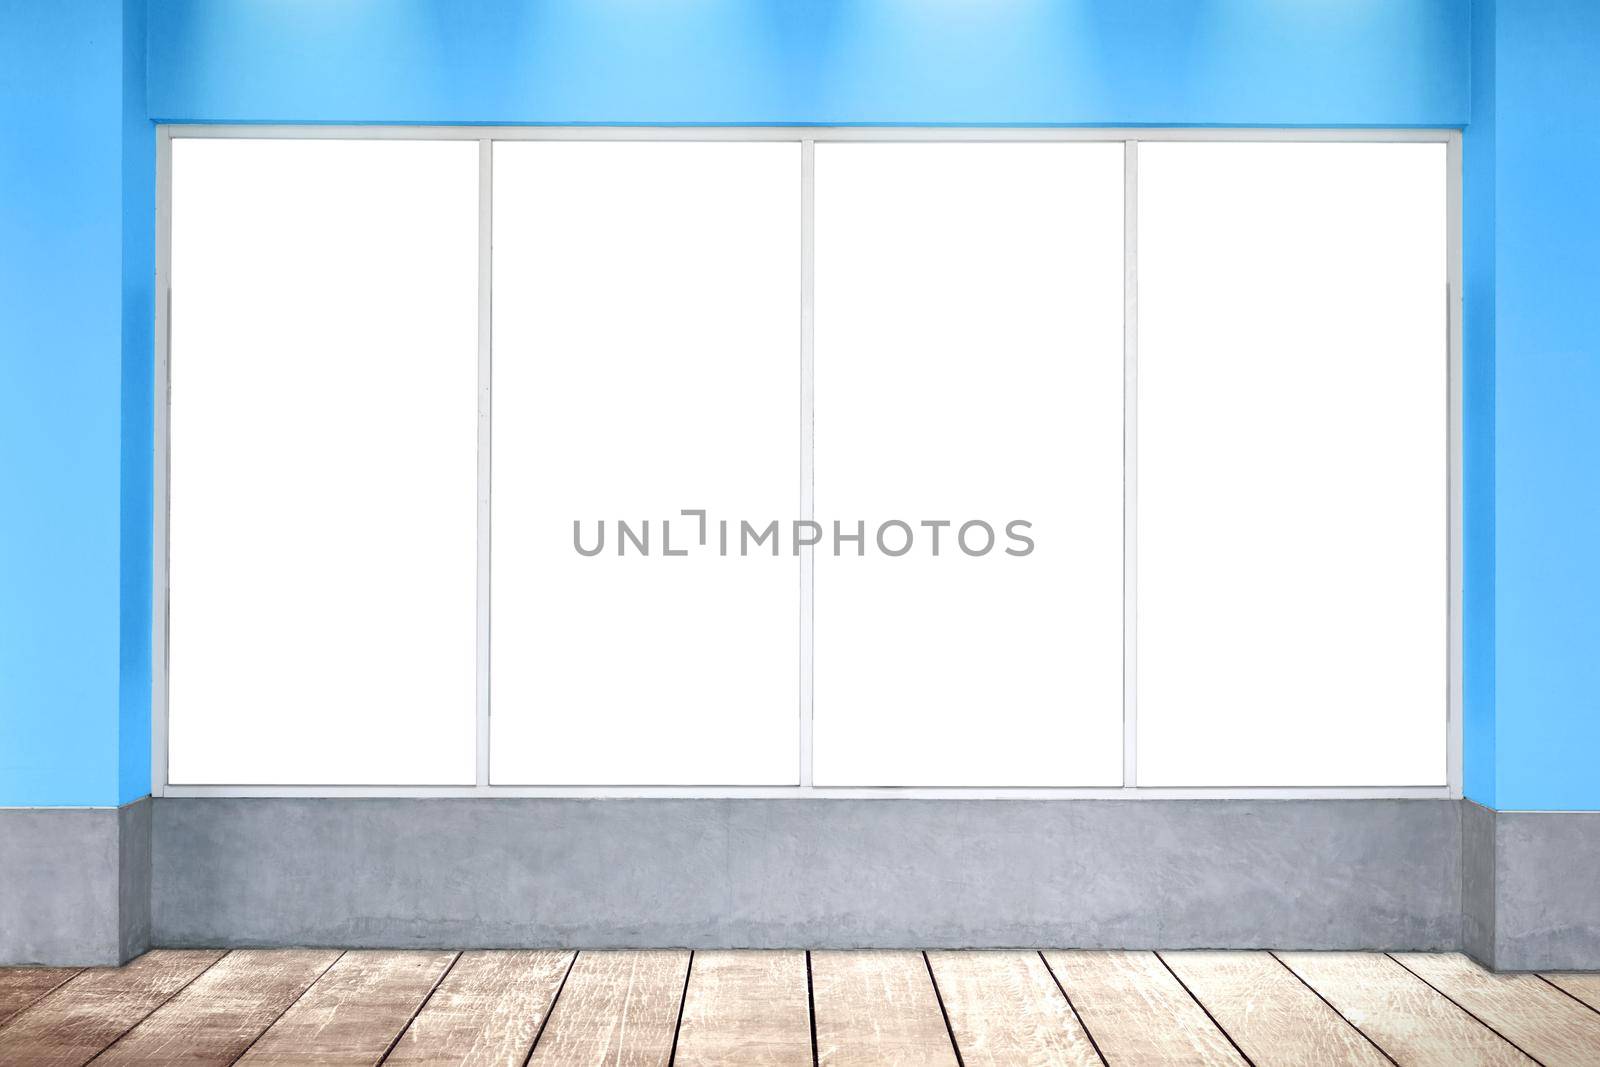 Bill board texture wall, wood, white board, room, text, photo. by jayzynism